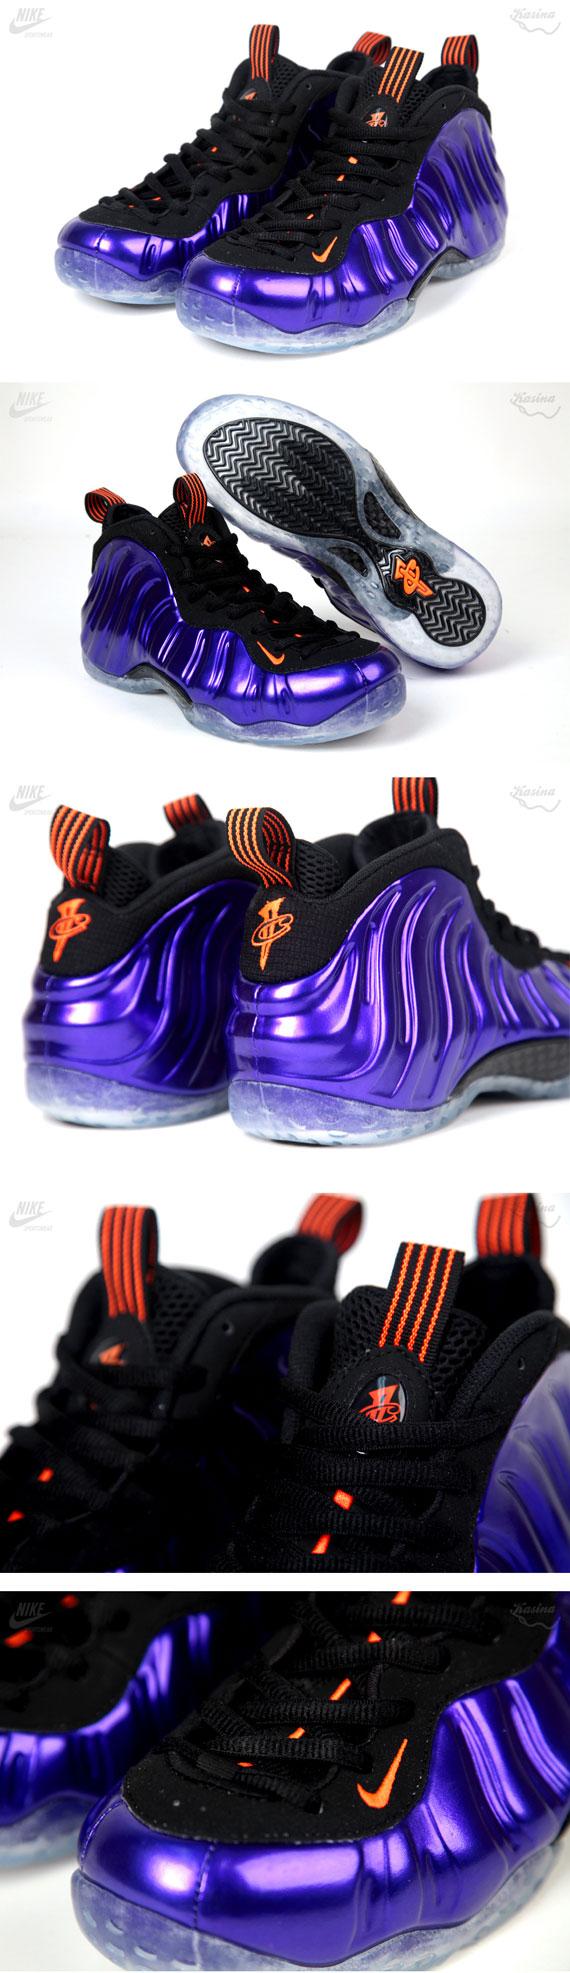 nike-air-foamposite-one-phoenix-suns-new-images-2